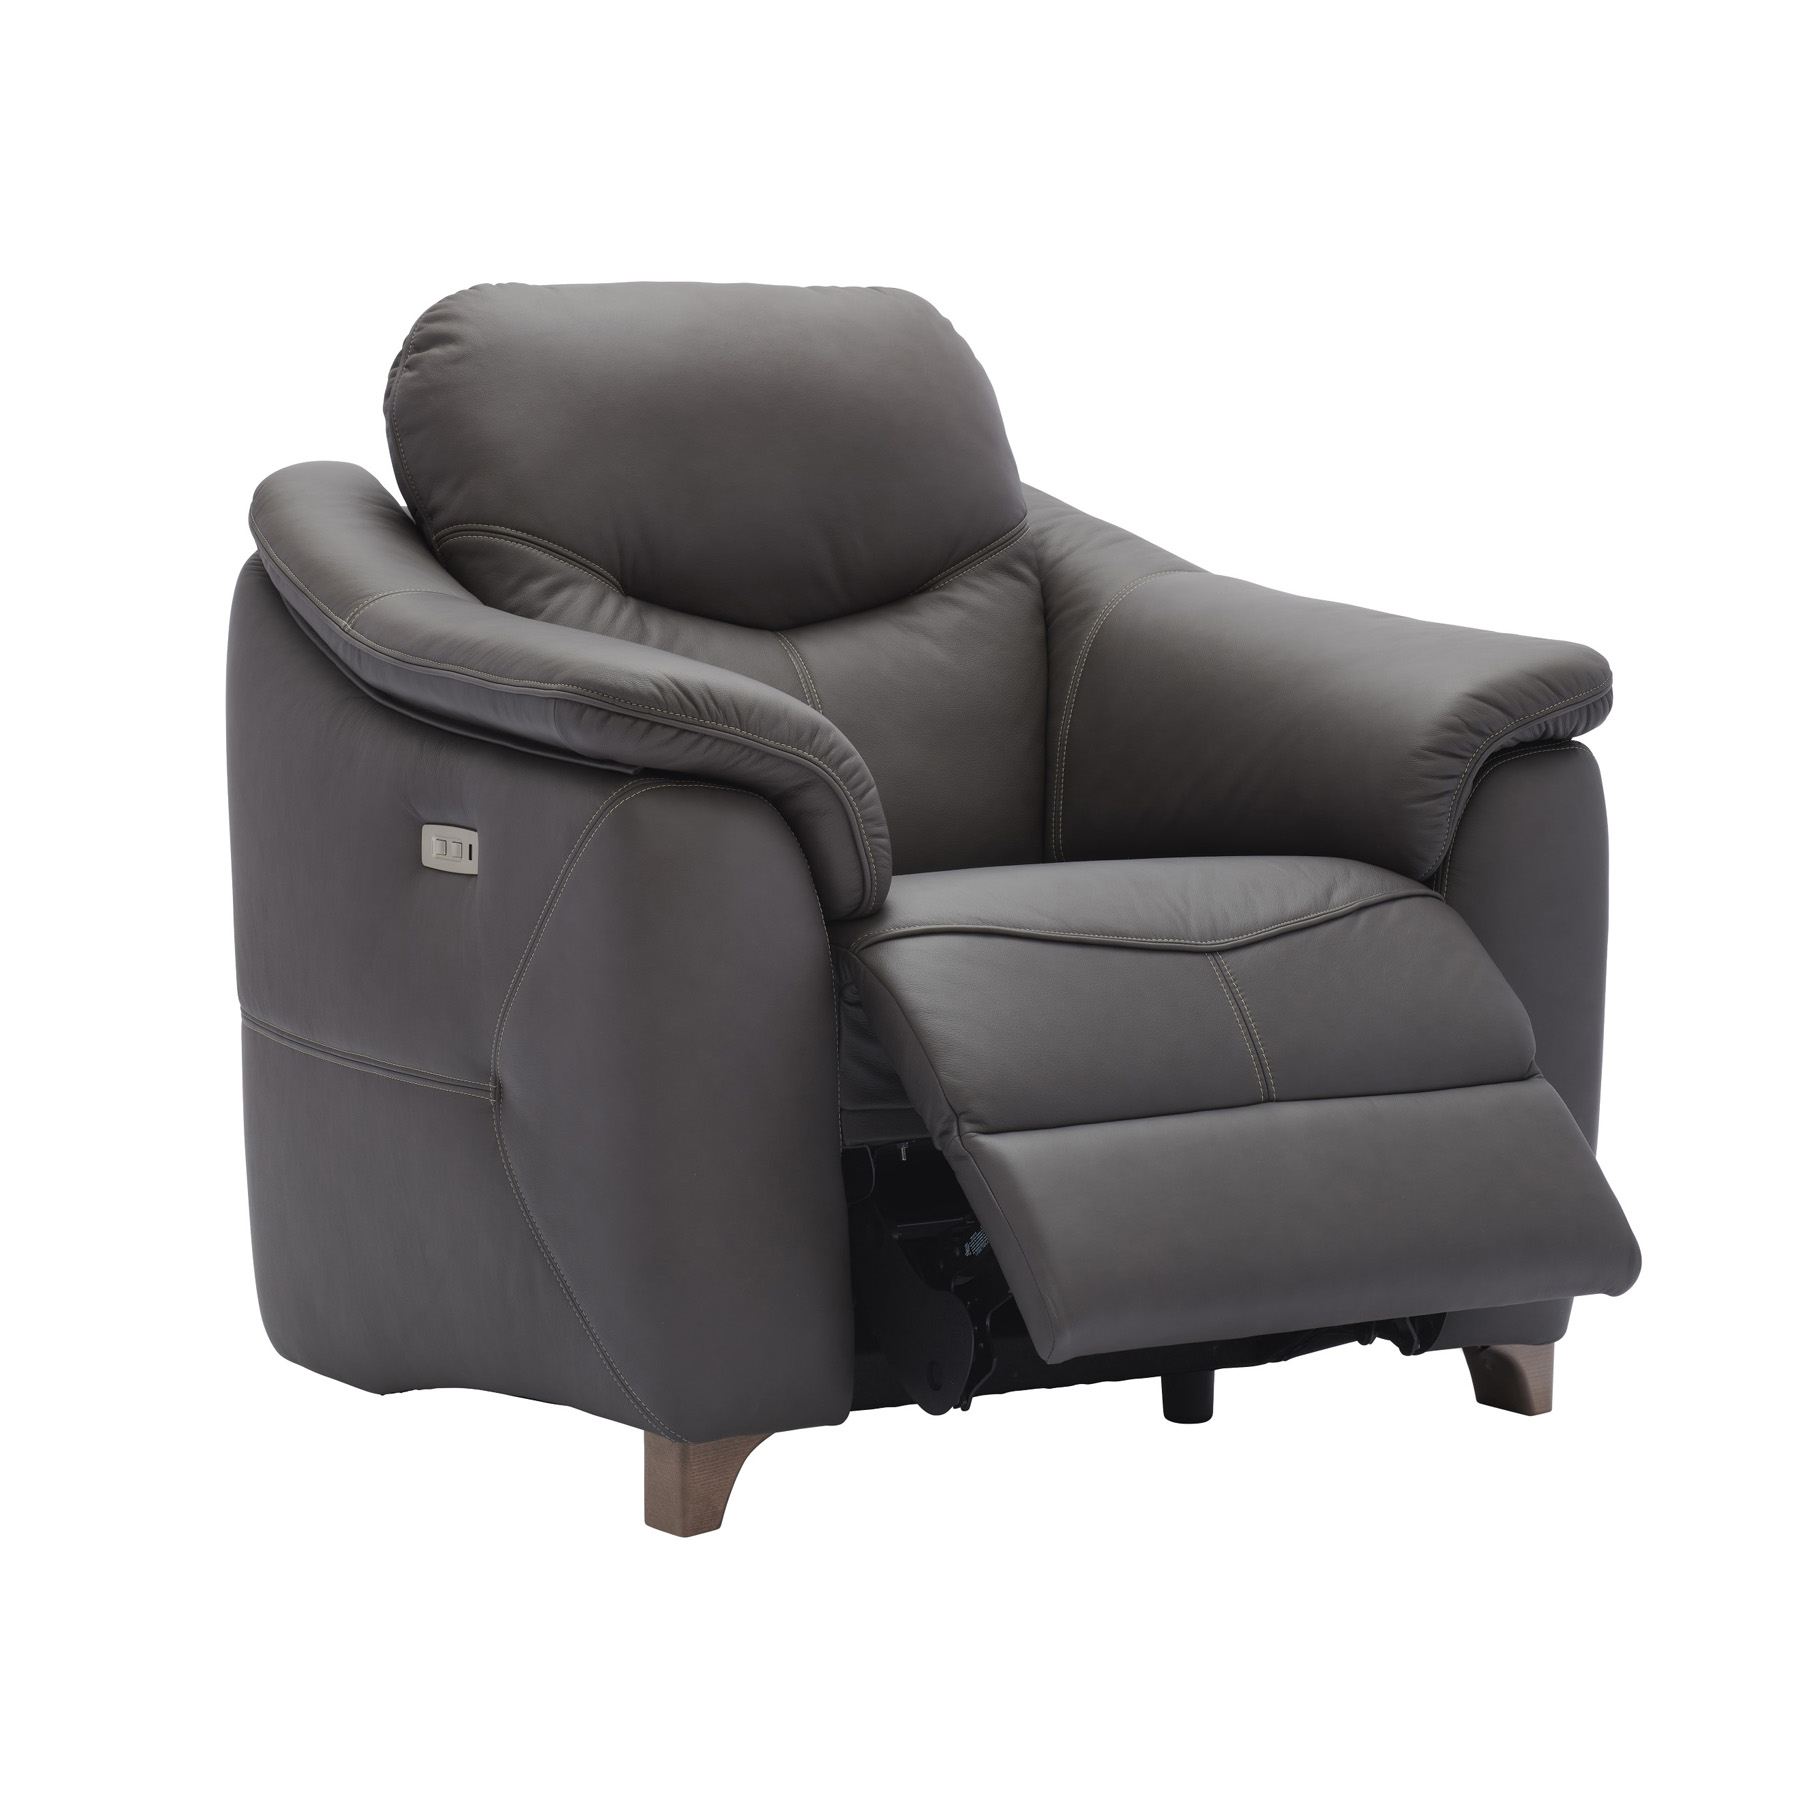 G Plan Jackson Leather Recliner Chair, Leather Chairs Recliner